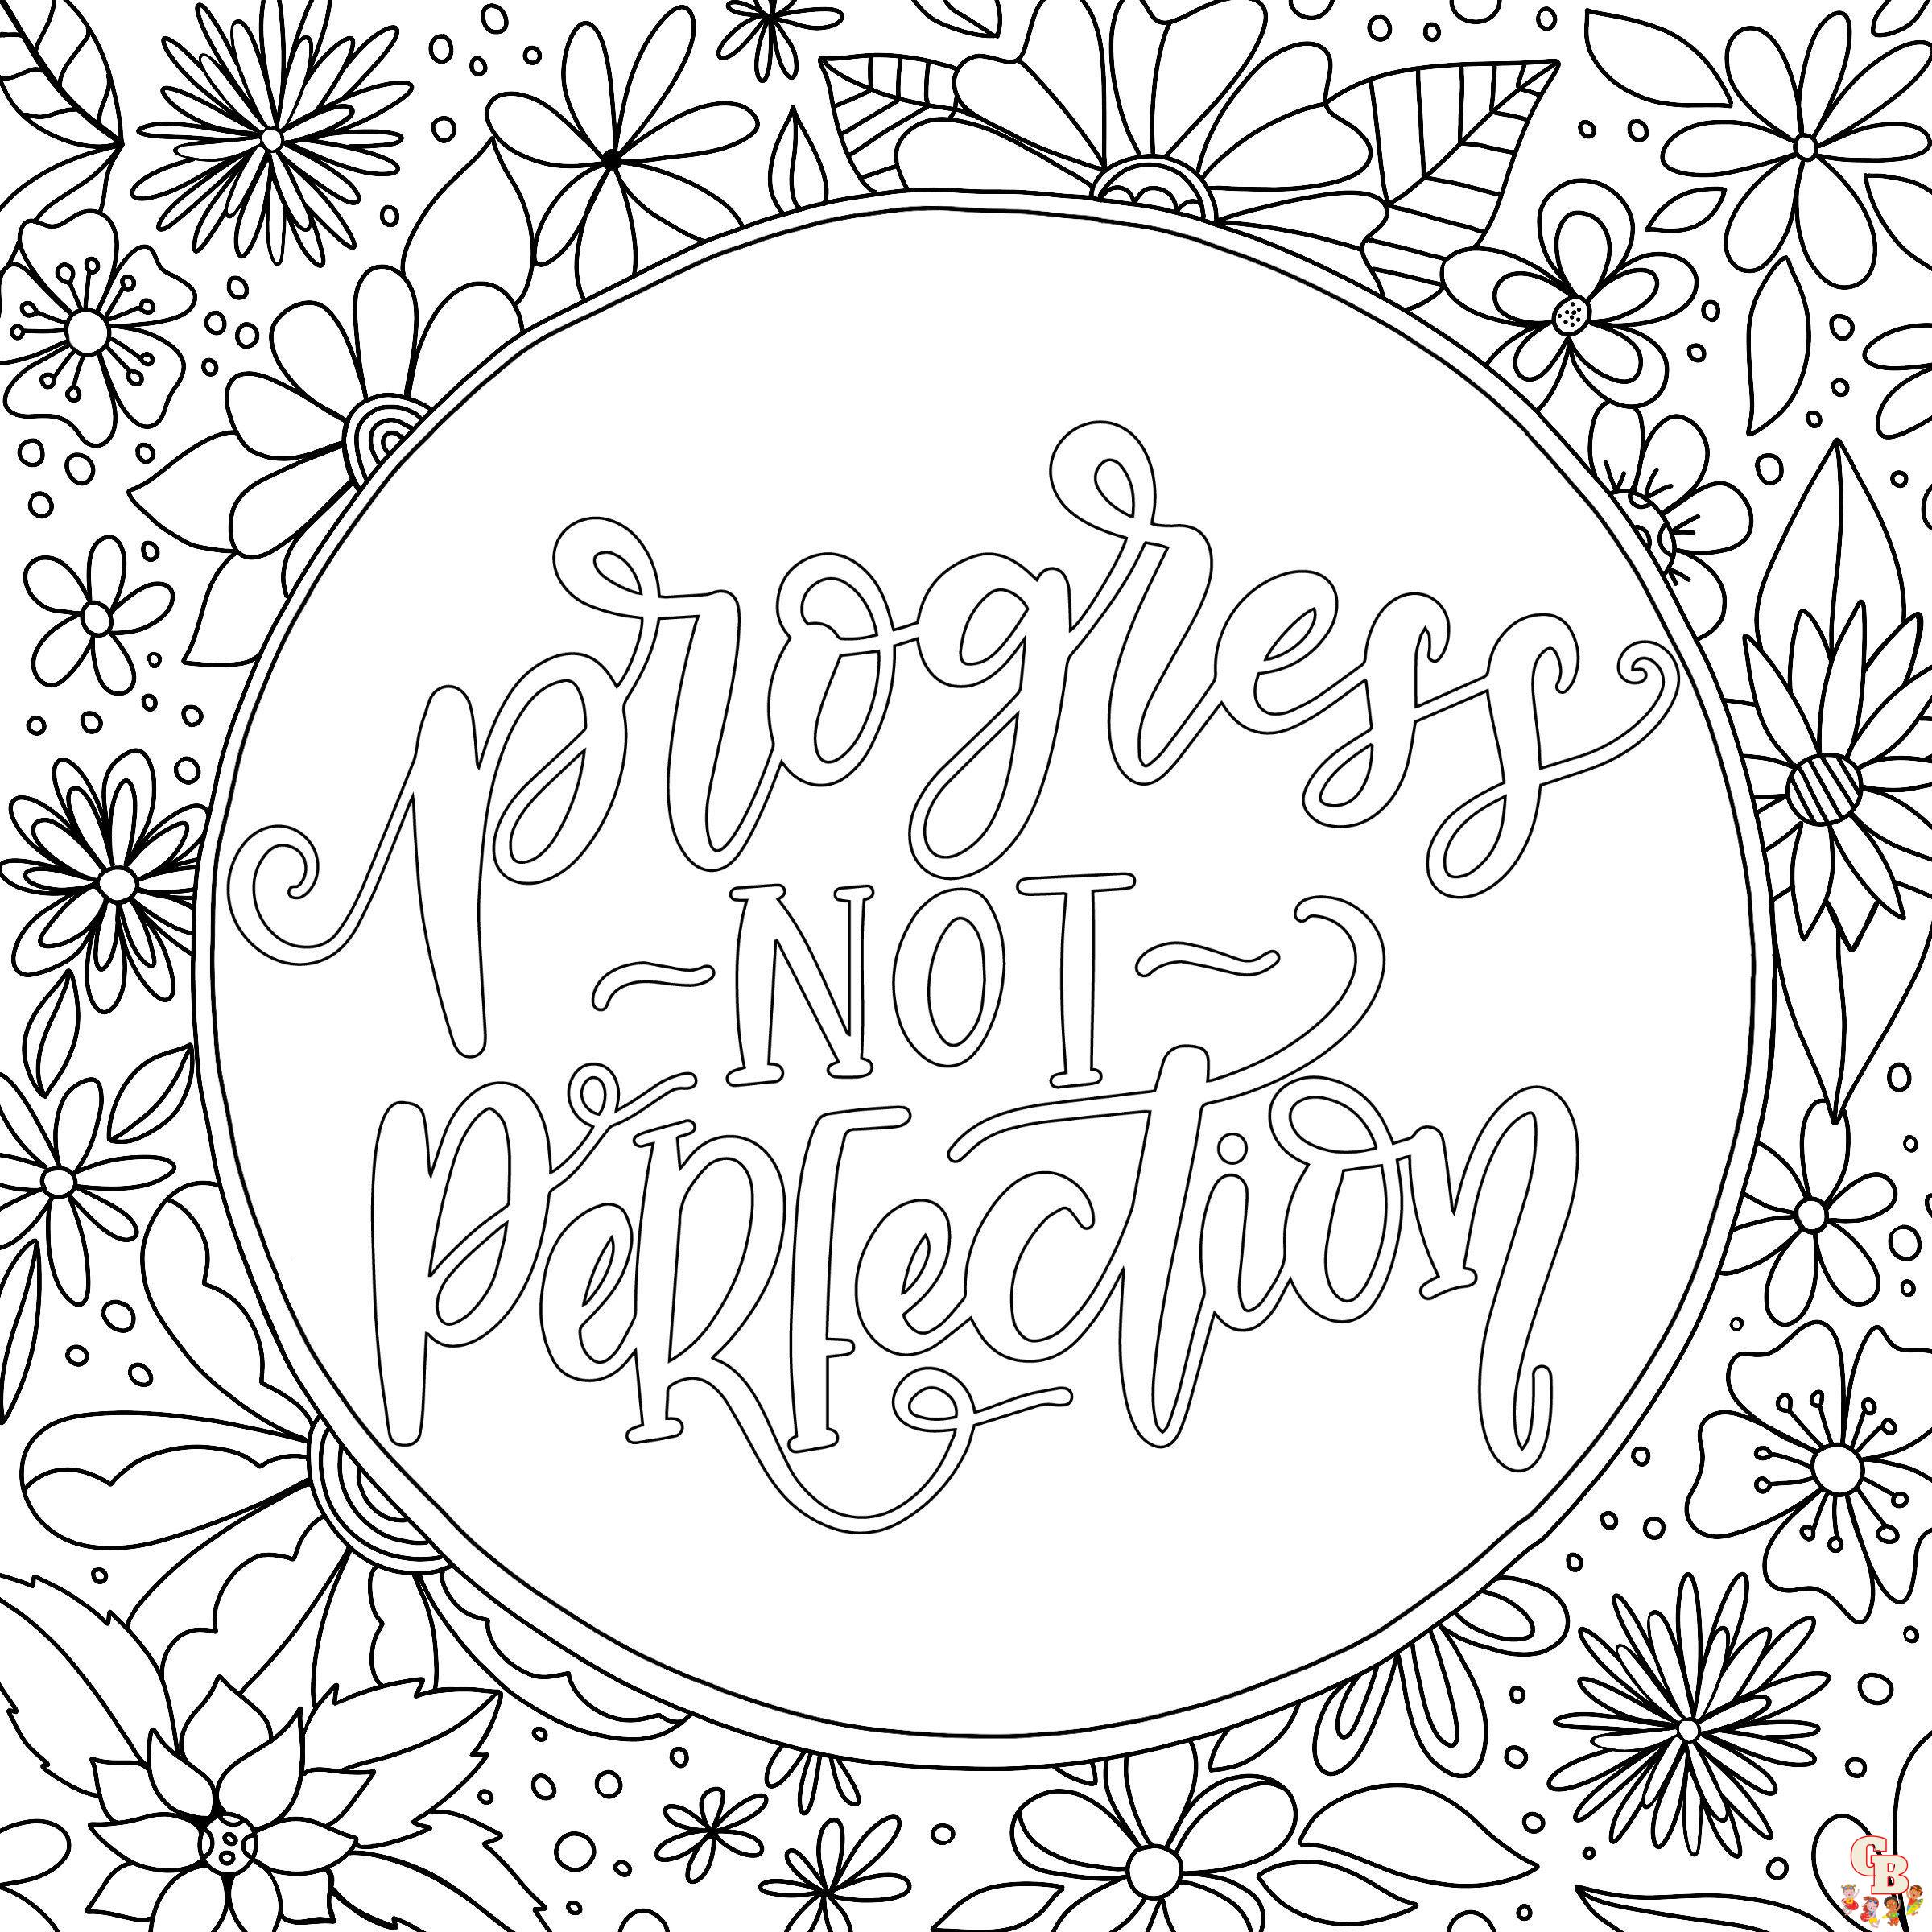 Discover the Benefits of Positive Coloring Pages - Coloring Pages ...